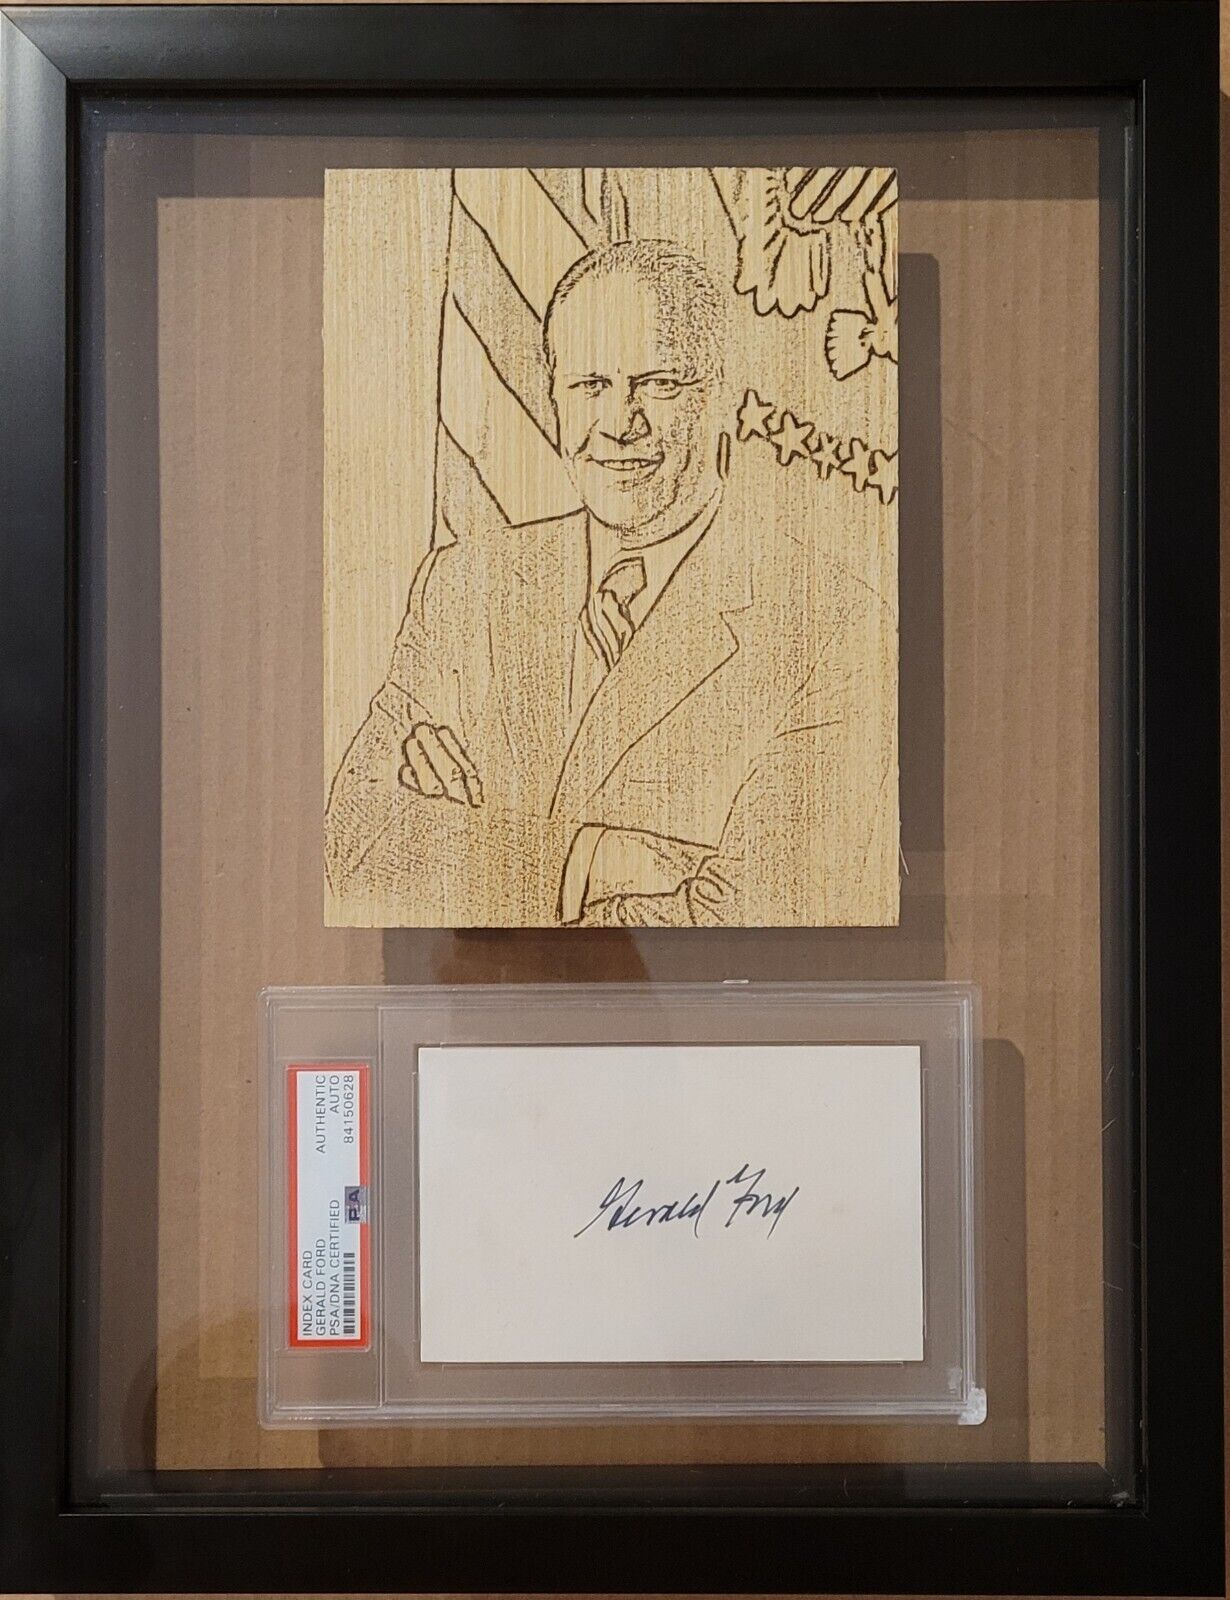 GERALD FORD PRESIDENT SIGNED PSA / DNA AUTOGRAPH FRAMED WITH WOOD ENGRAVING